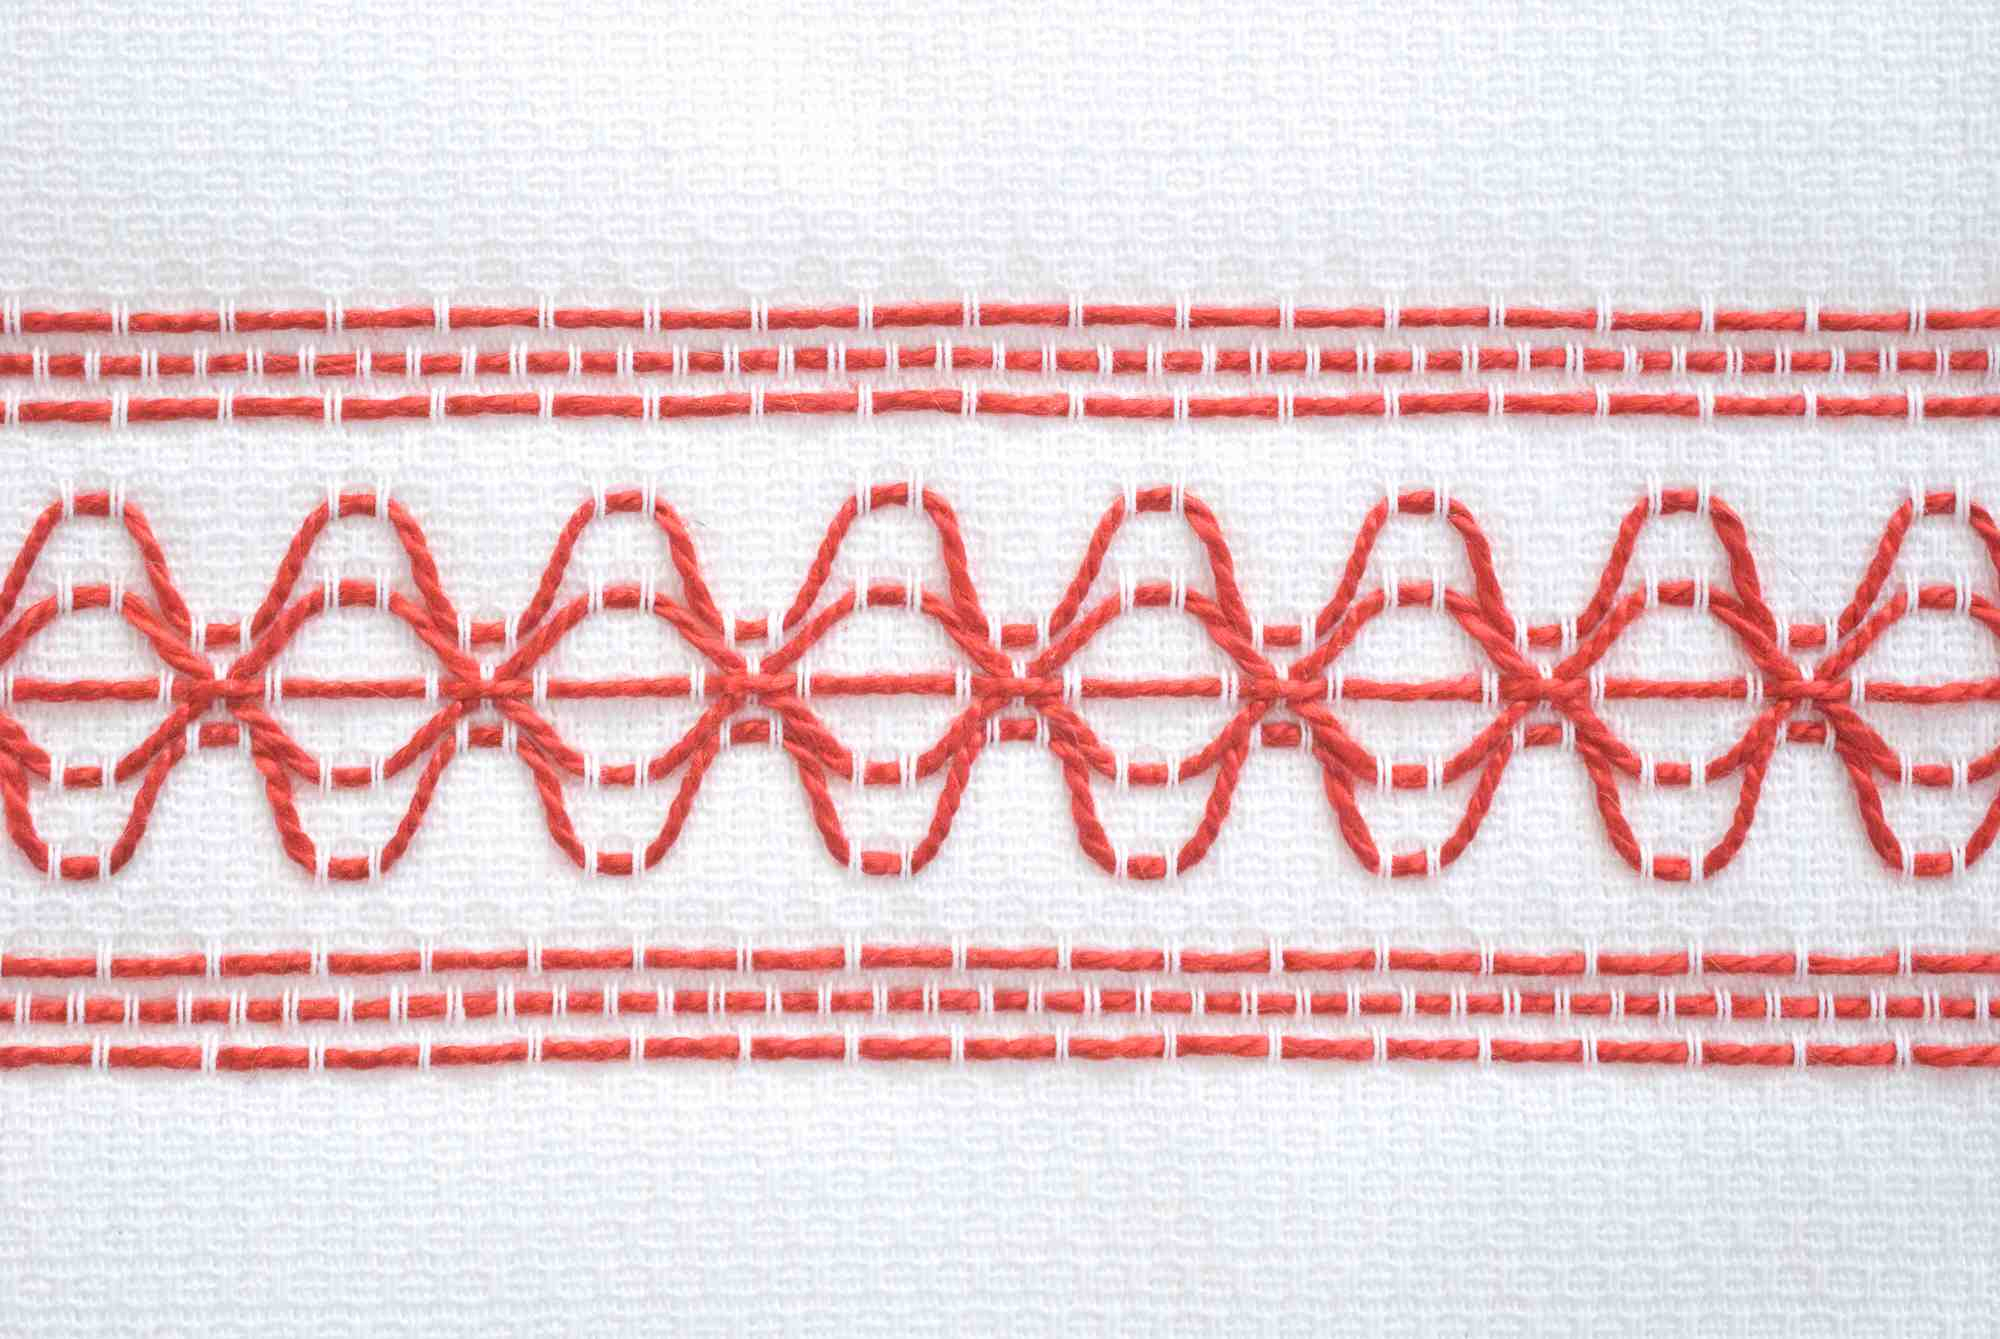 Huck Embroidery Patterns Free Swedish Huck Embroidery